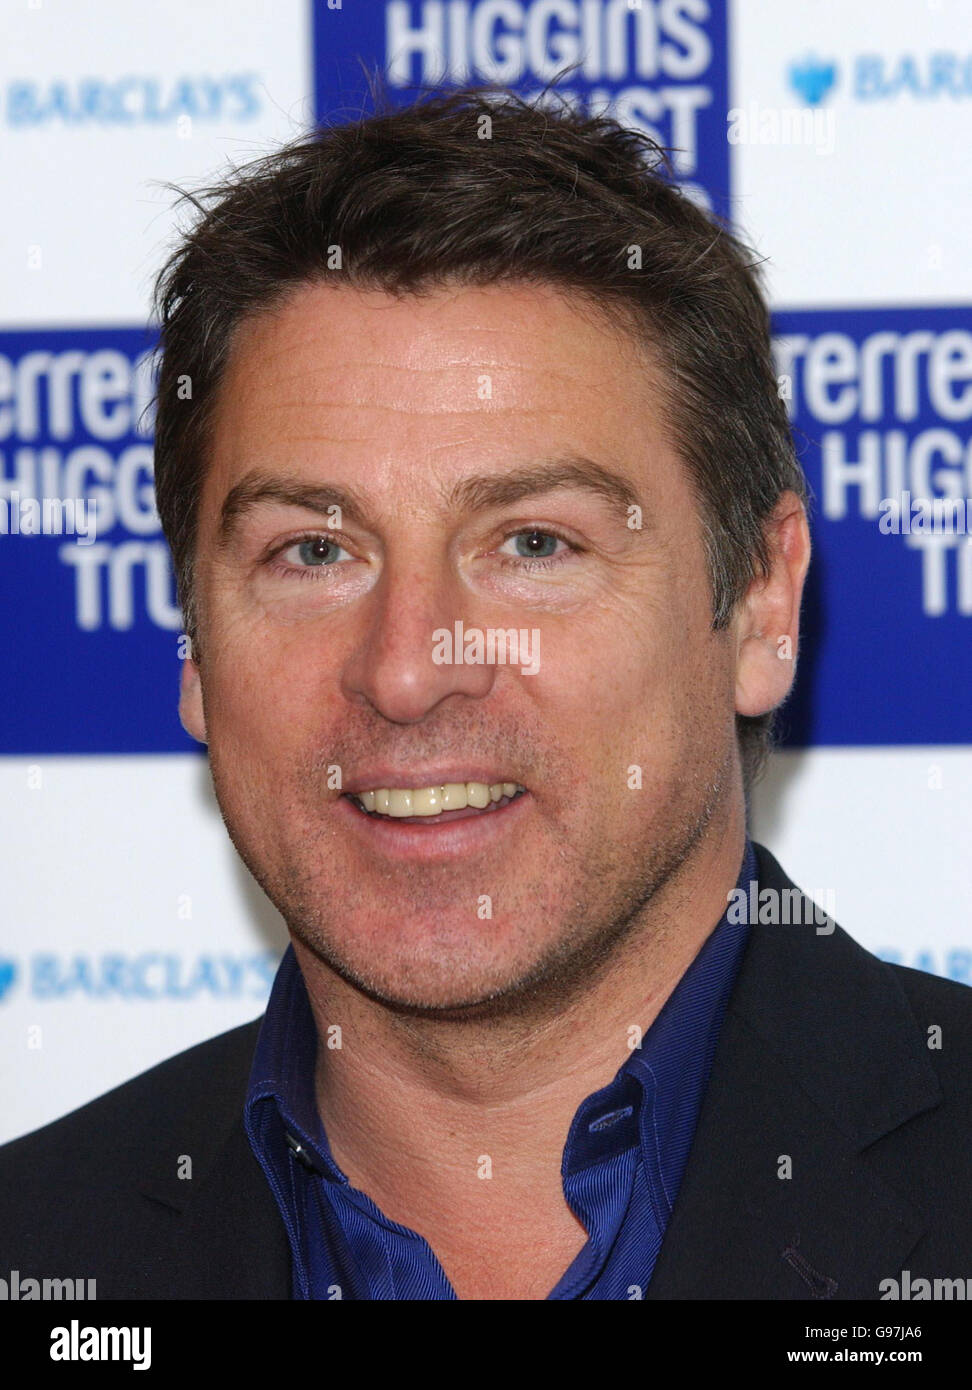 GMTV's Ross Kelly during the 10th annual Lighthouse Gala Auction to raise funds for the Terrence Higgins Trust, at Christie's in central London, Wednesday 15 March 2006. PRESS ASSOCIATION Photo. Photo credit should read: Anthony Harvey/PA Stock Photo